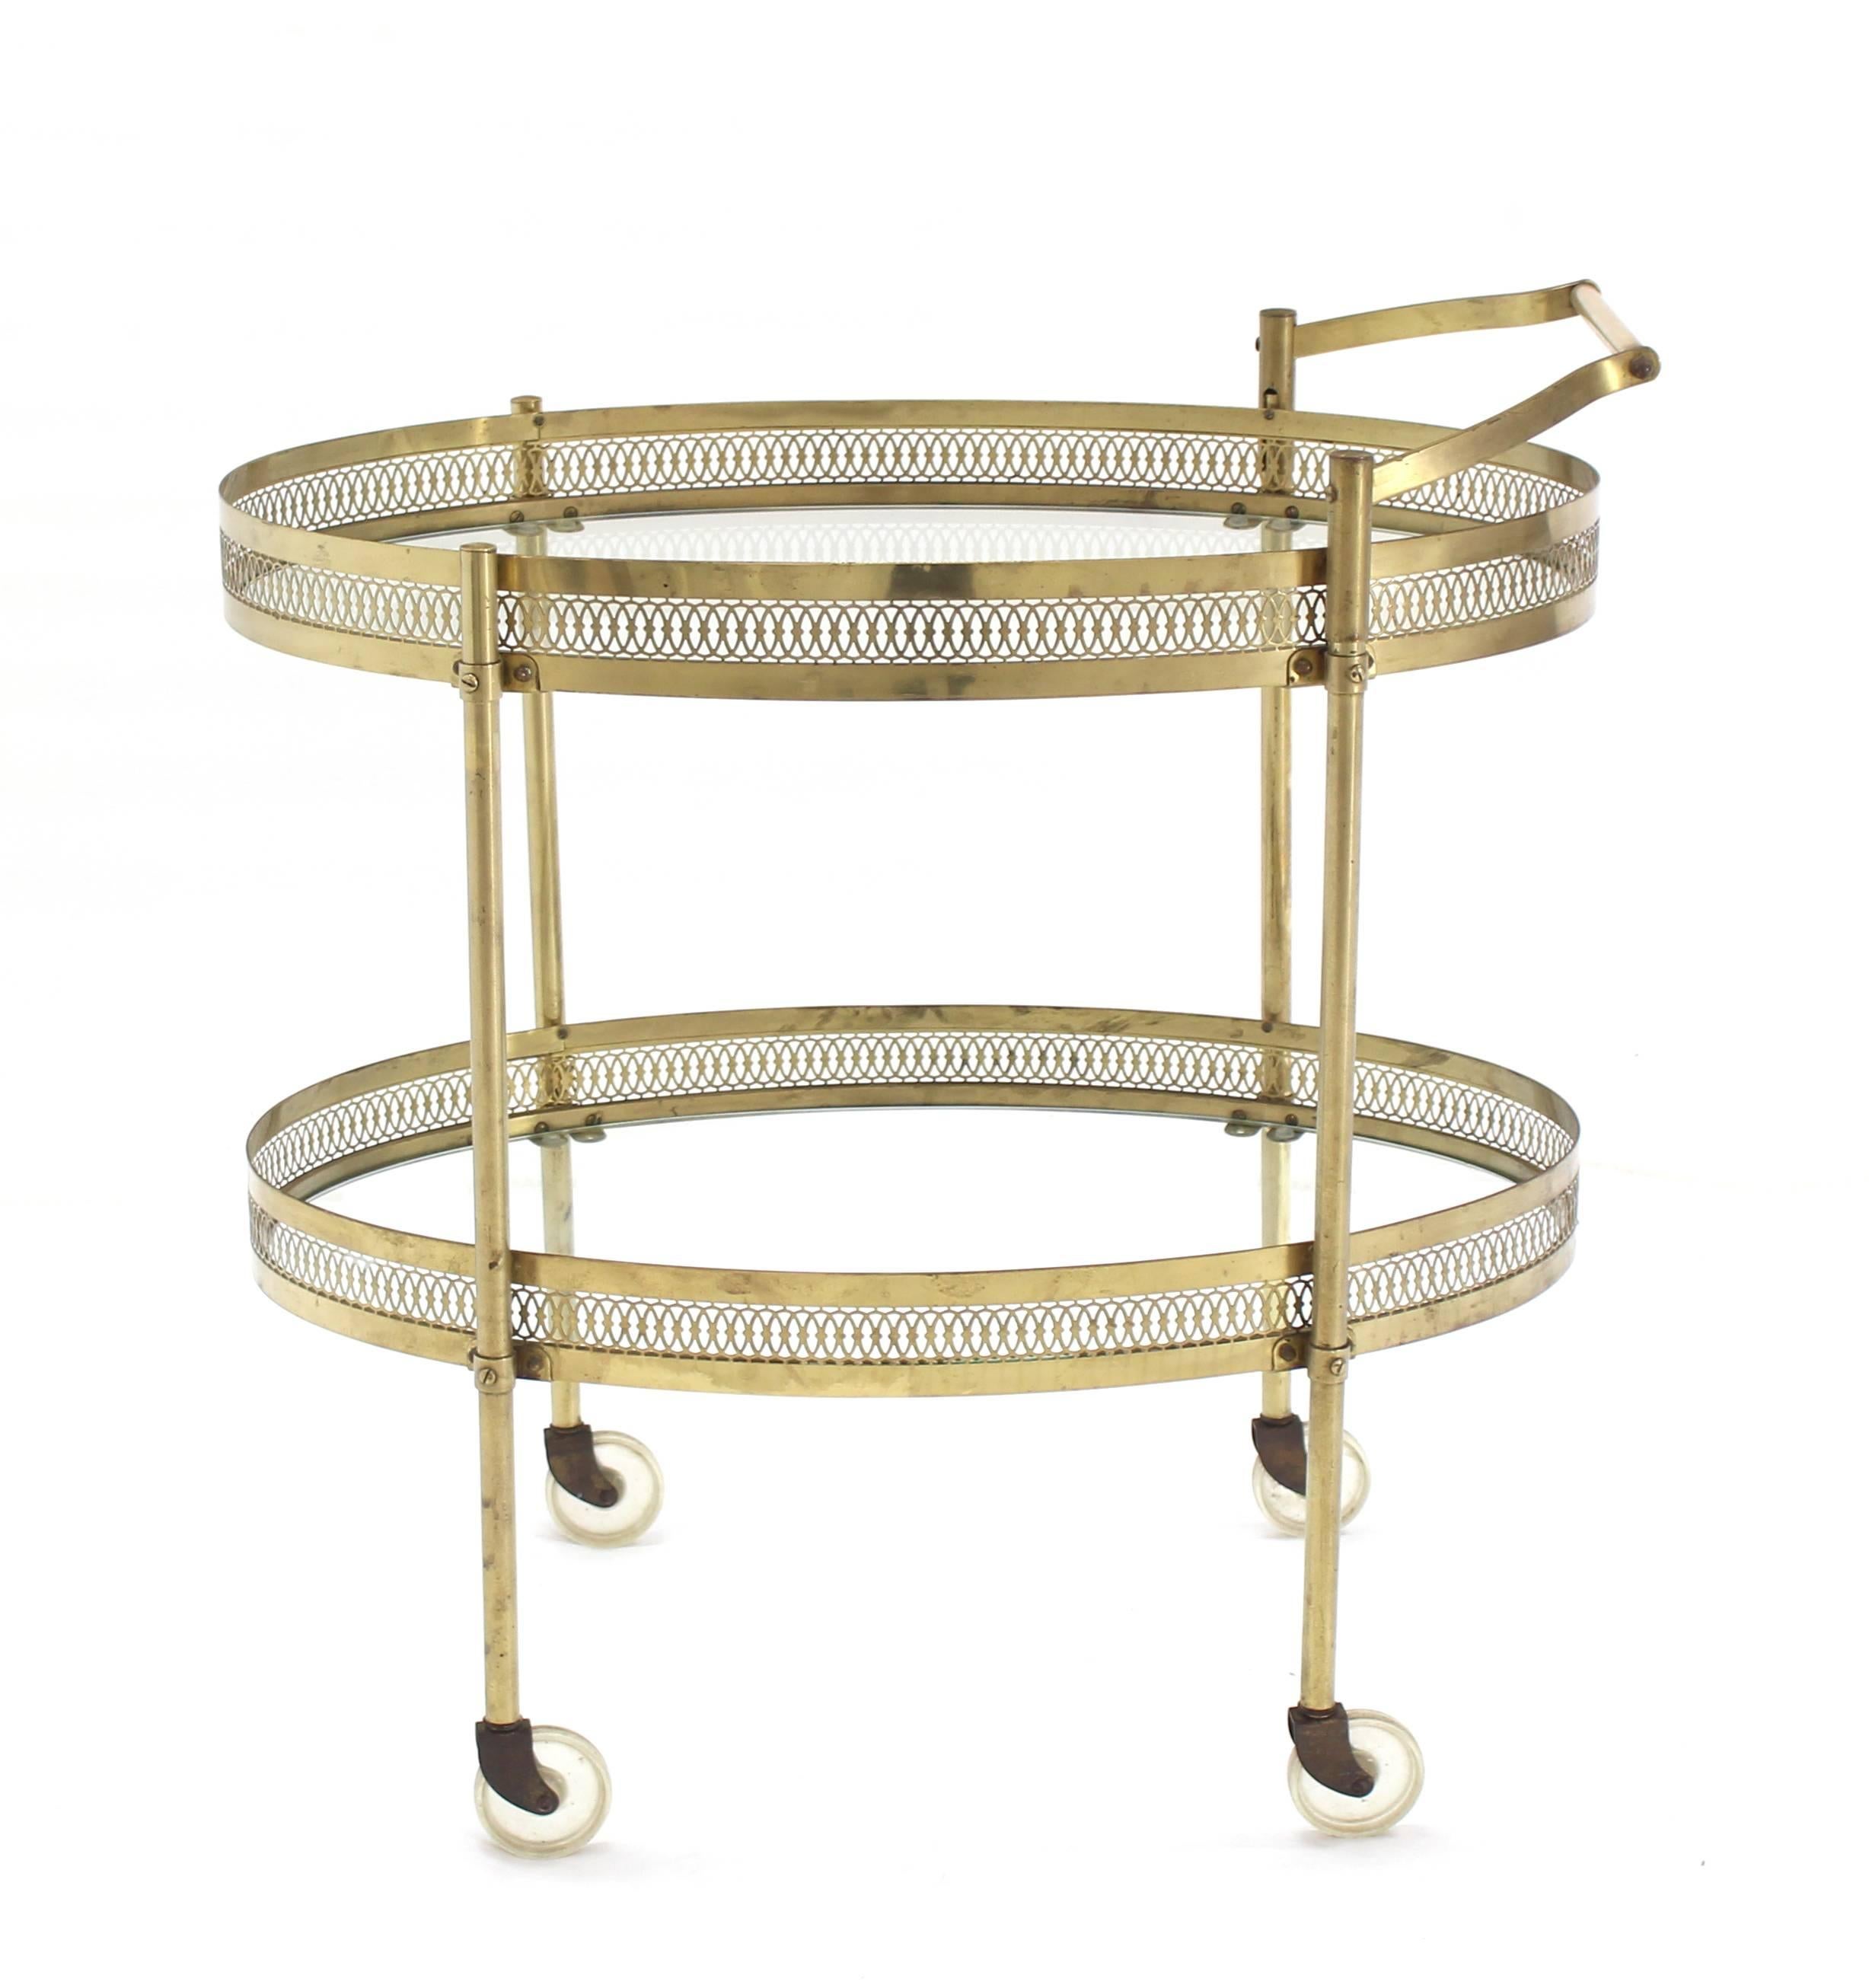 Oval Pierced Brass and Glass Two-Tier Tea Serving Cart on Wheels 2